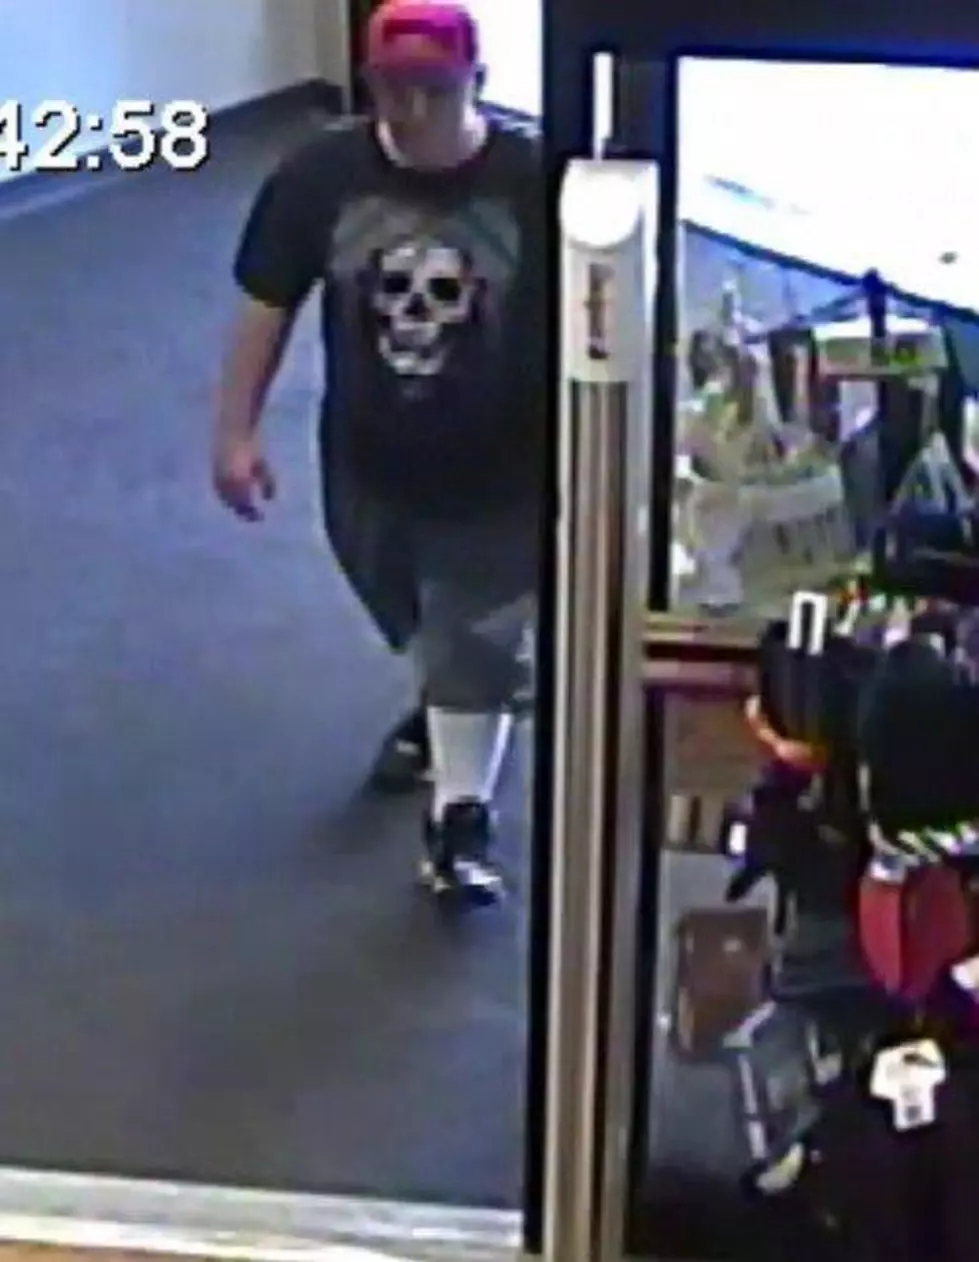 Have You Seen This Badly Dressed Shoplifter? Help KPD!